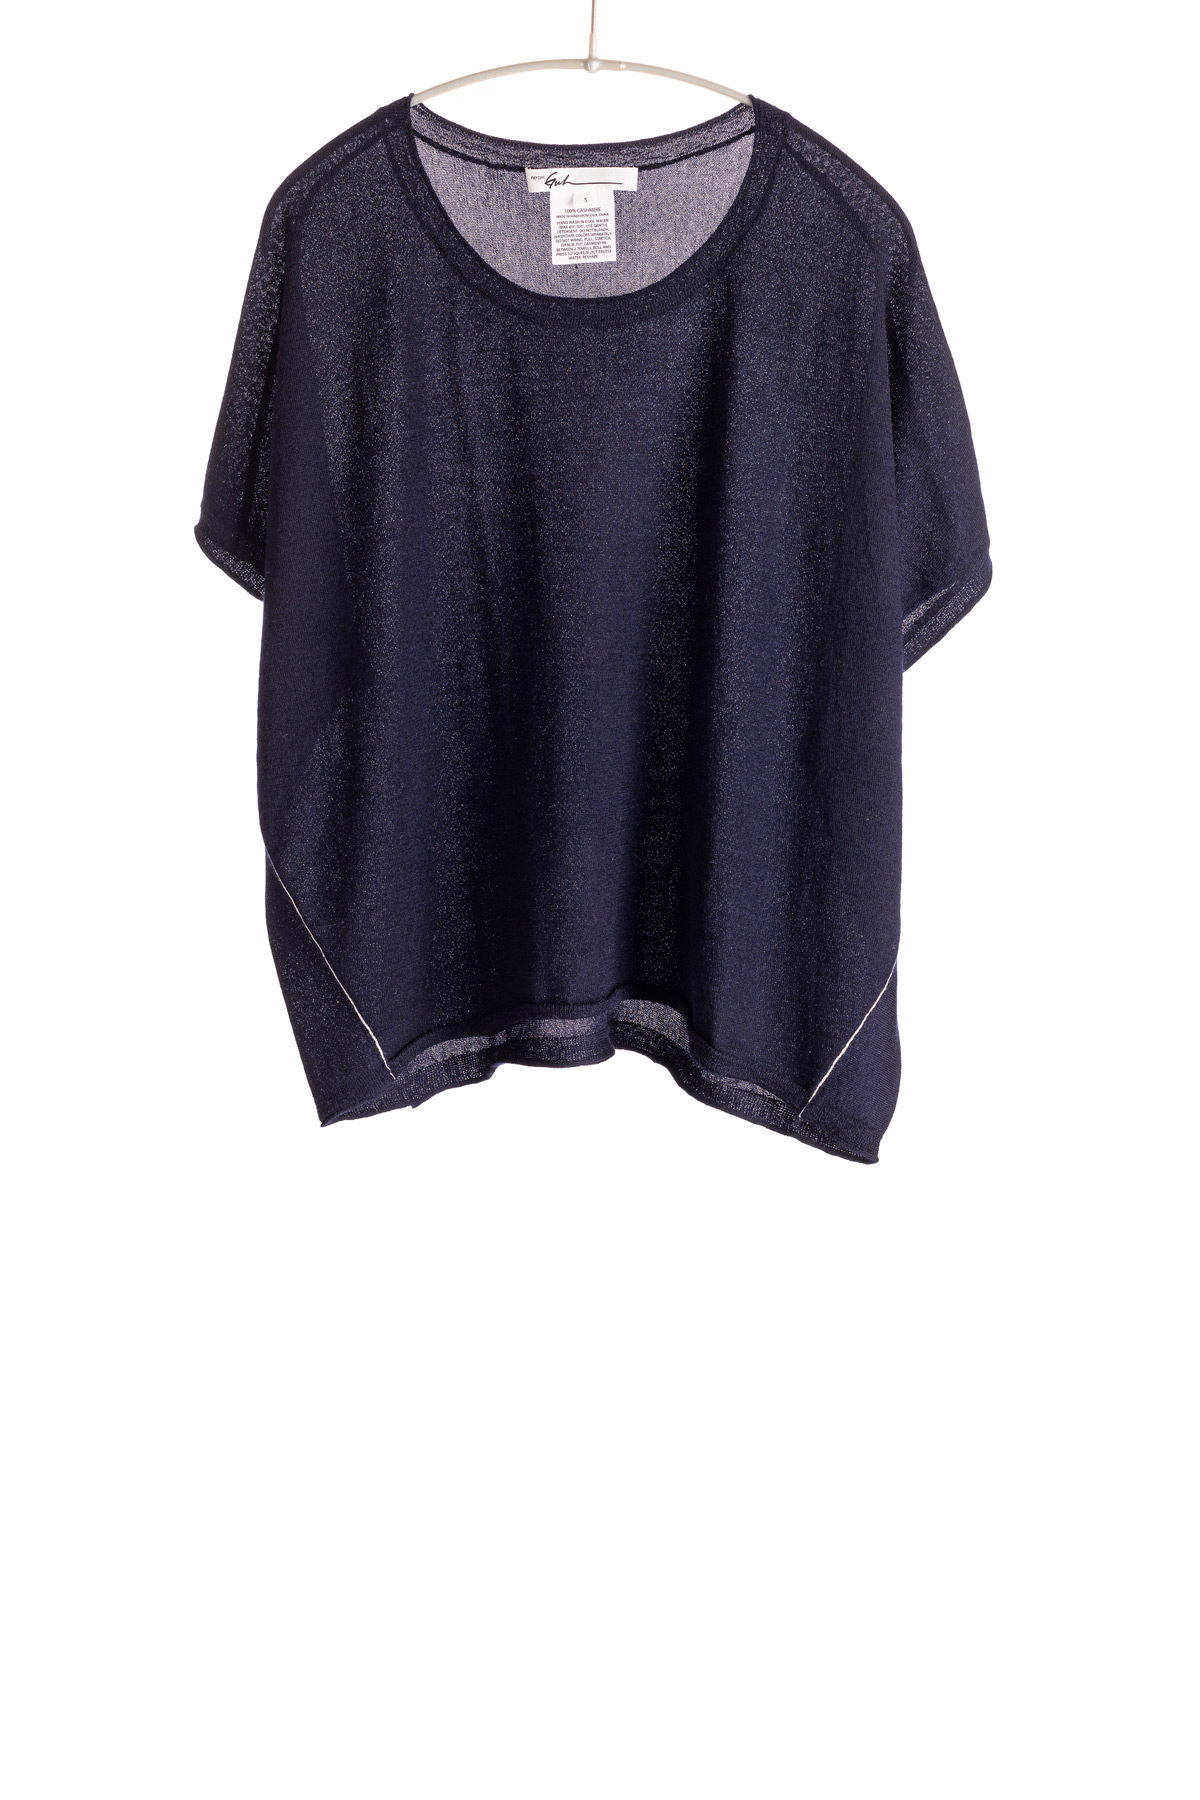 S409_Popover_Navy_H1Front